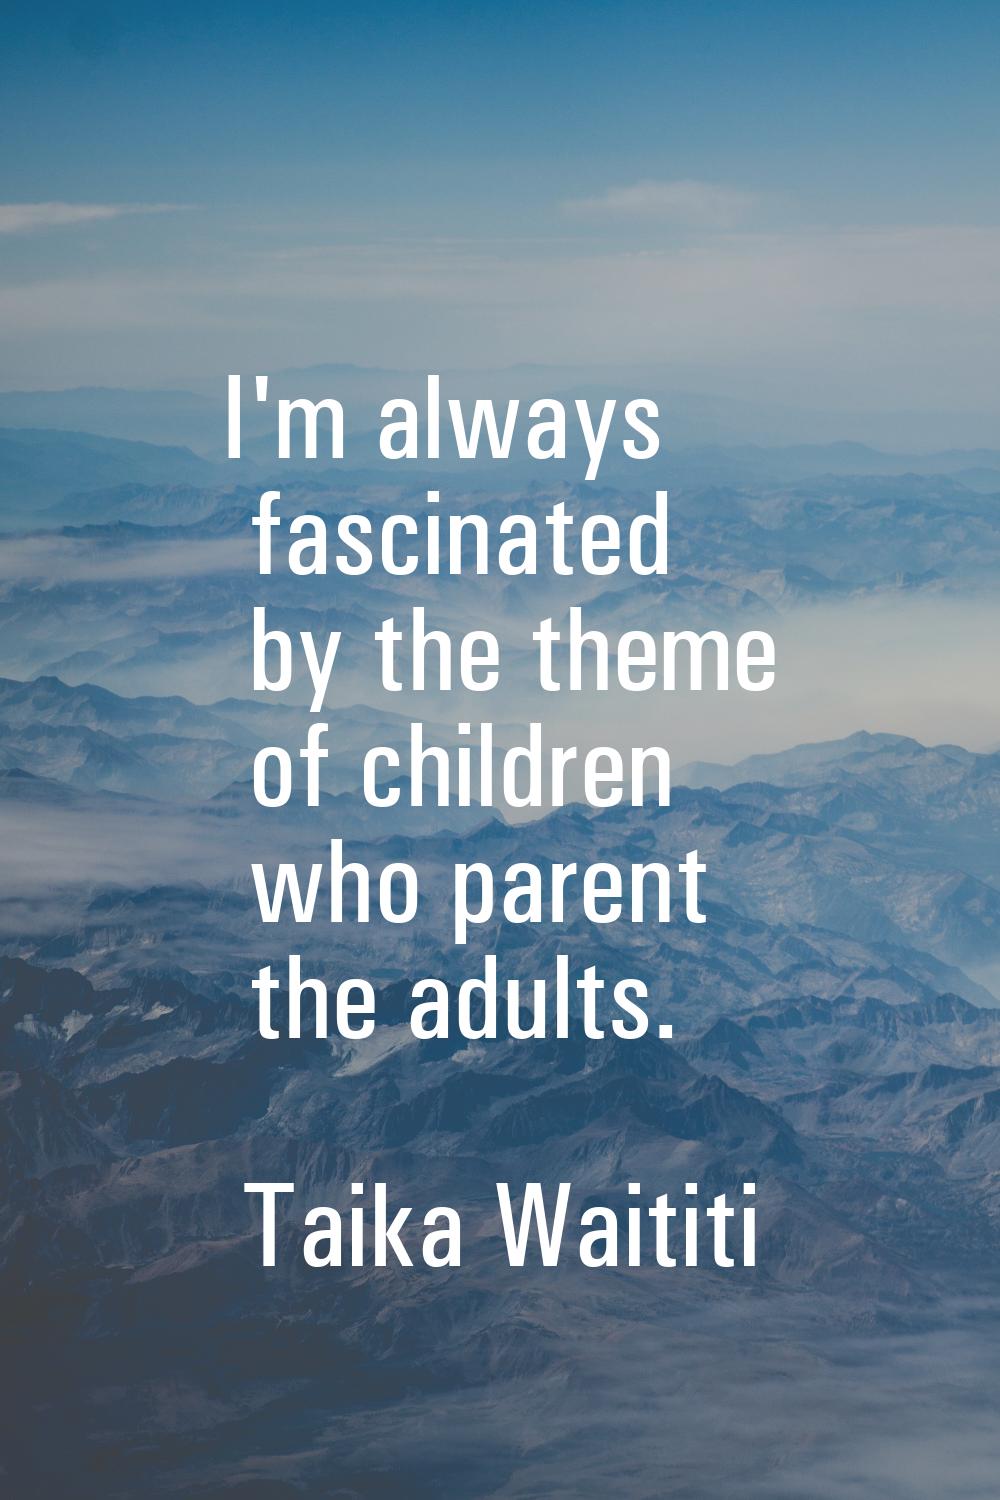 I'm always fascinated by the theme of children who parent the adults.